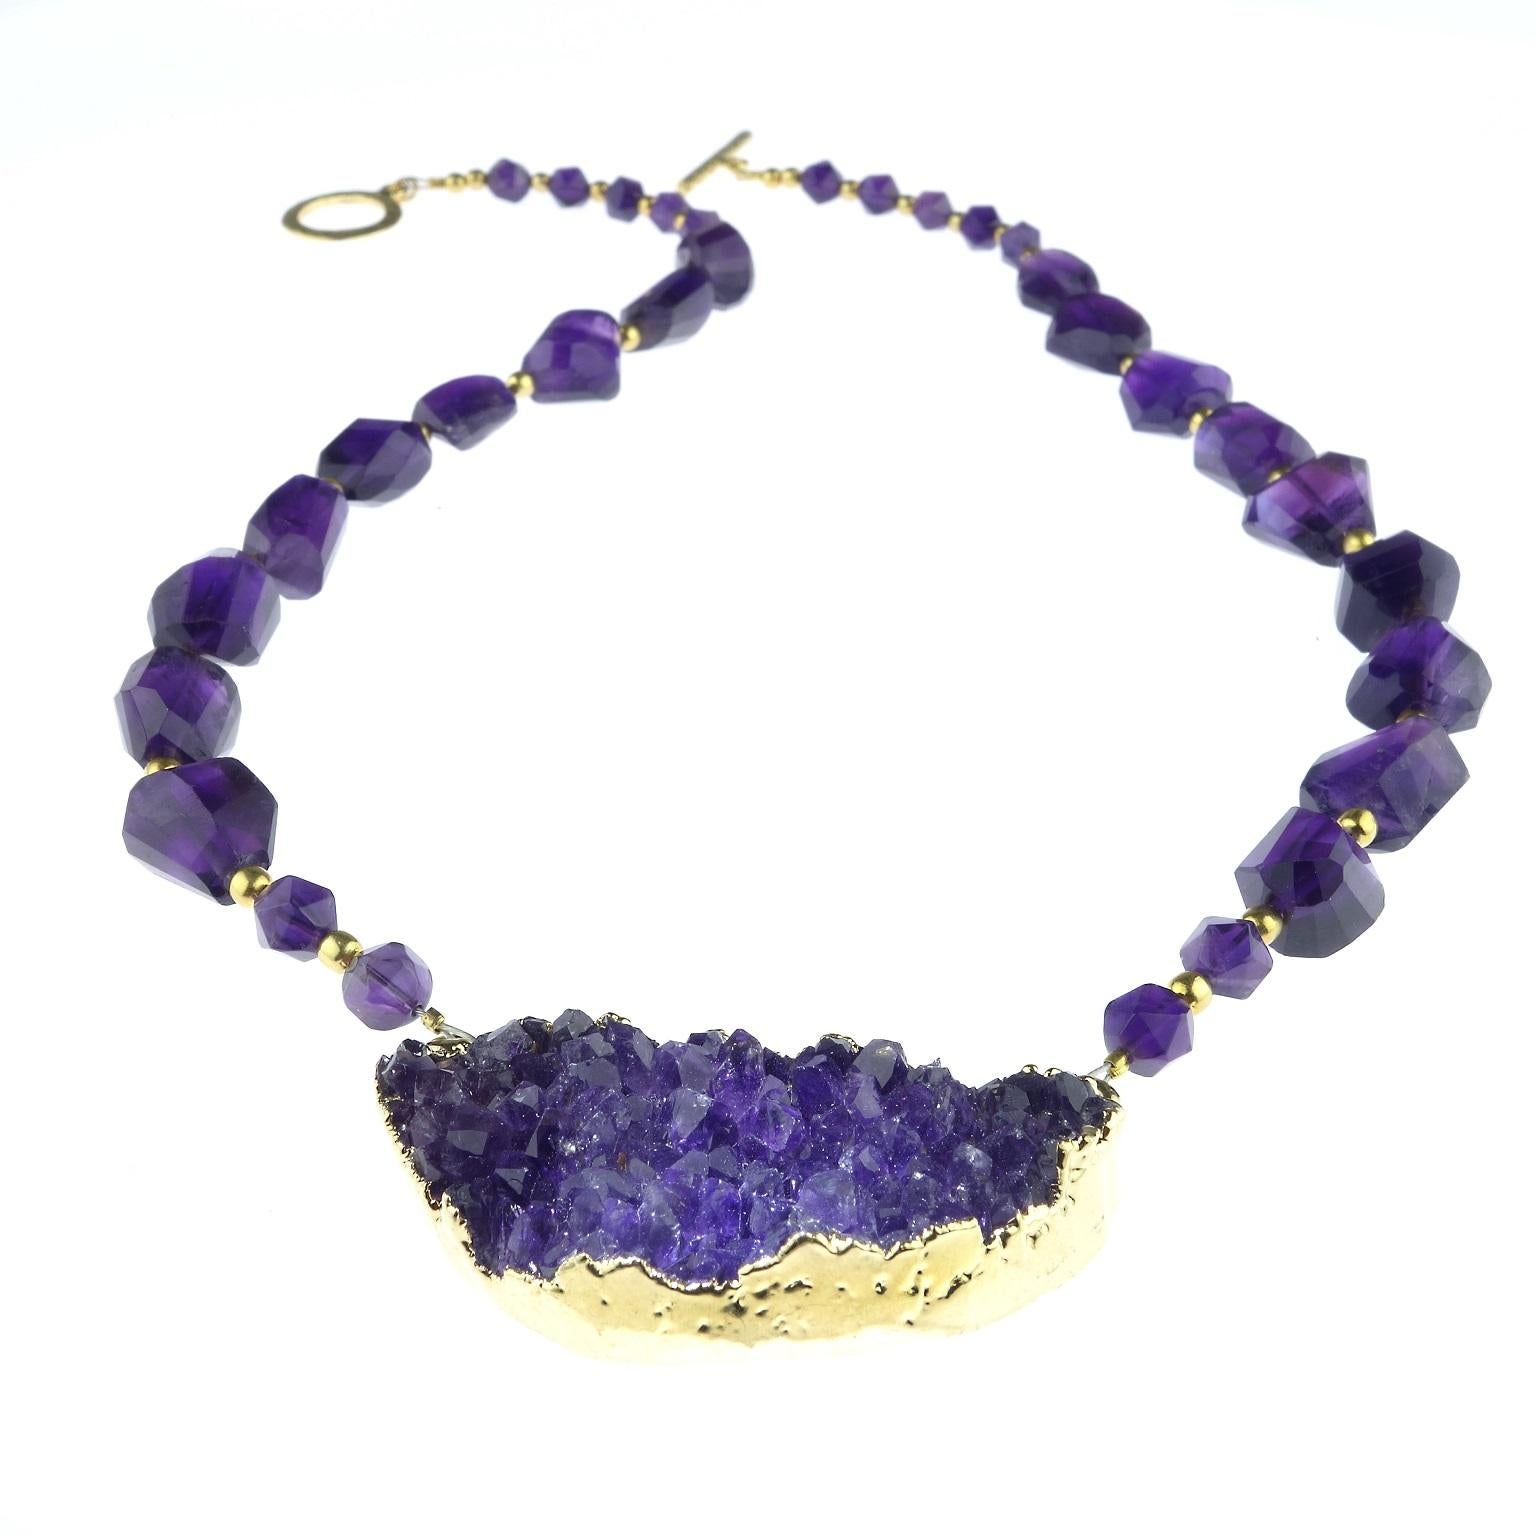 Sunning Amethyst Druzy Focal on rough cut and polished Amethyst necklace. The Amethyst Druzy is bezeled with electroplated gold and the Amethysts in the necklace are enhanced with goldtone accents.  The 20.50 inch necklace in secured with a gold